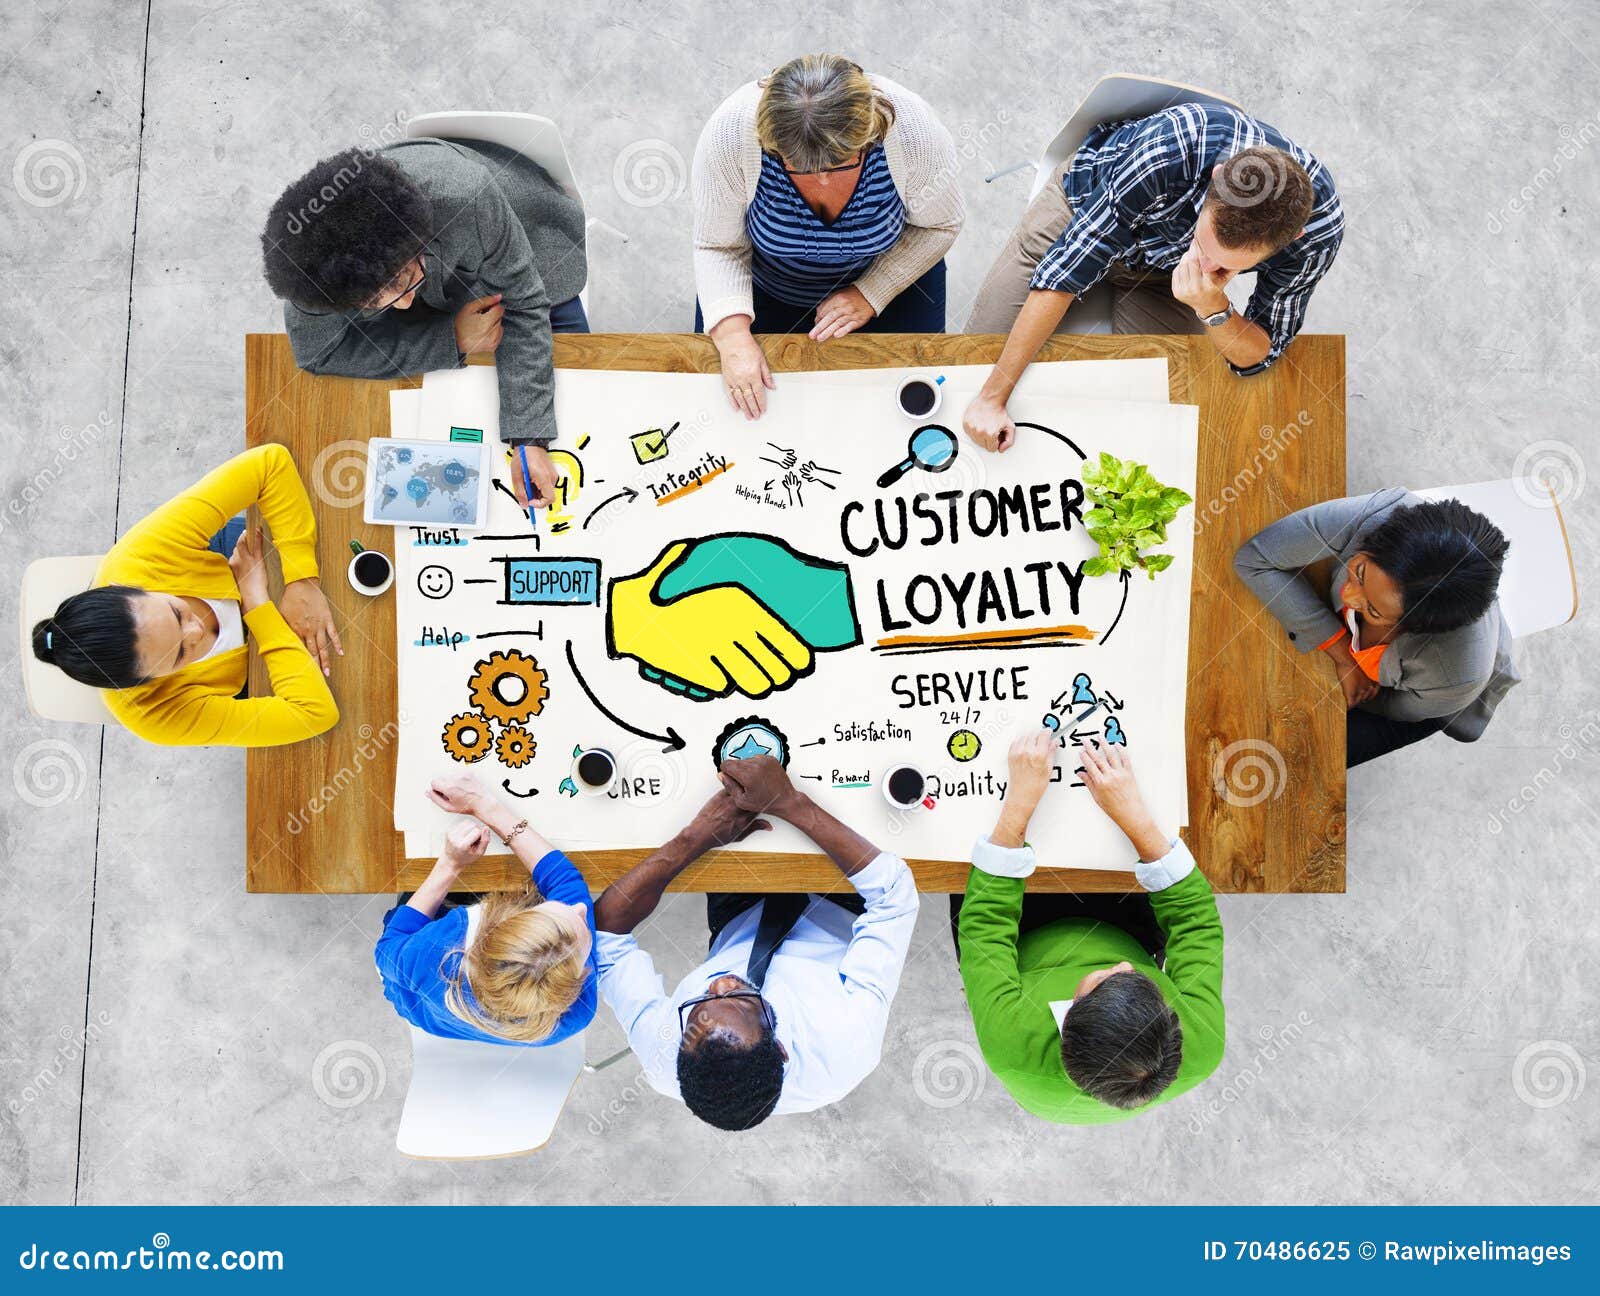 customer loyalty service support care trust casual concept